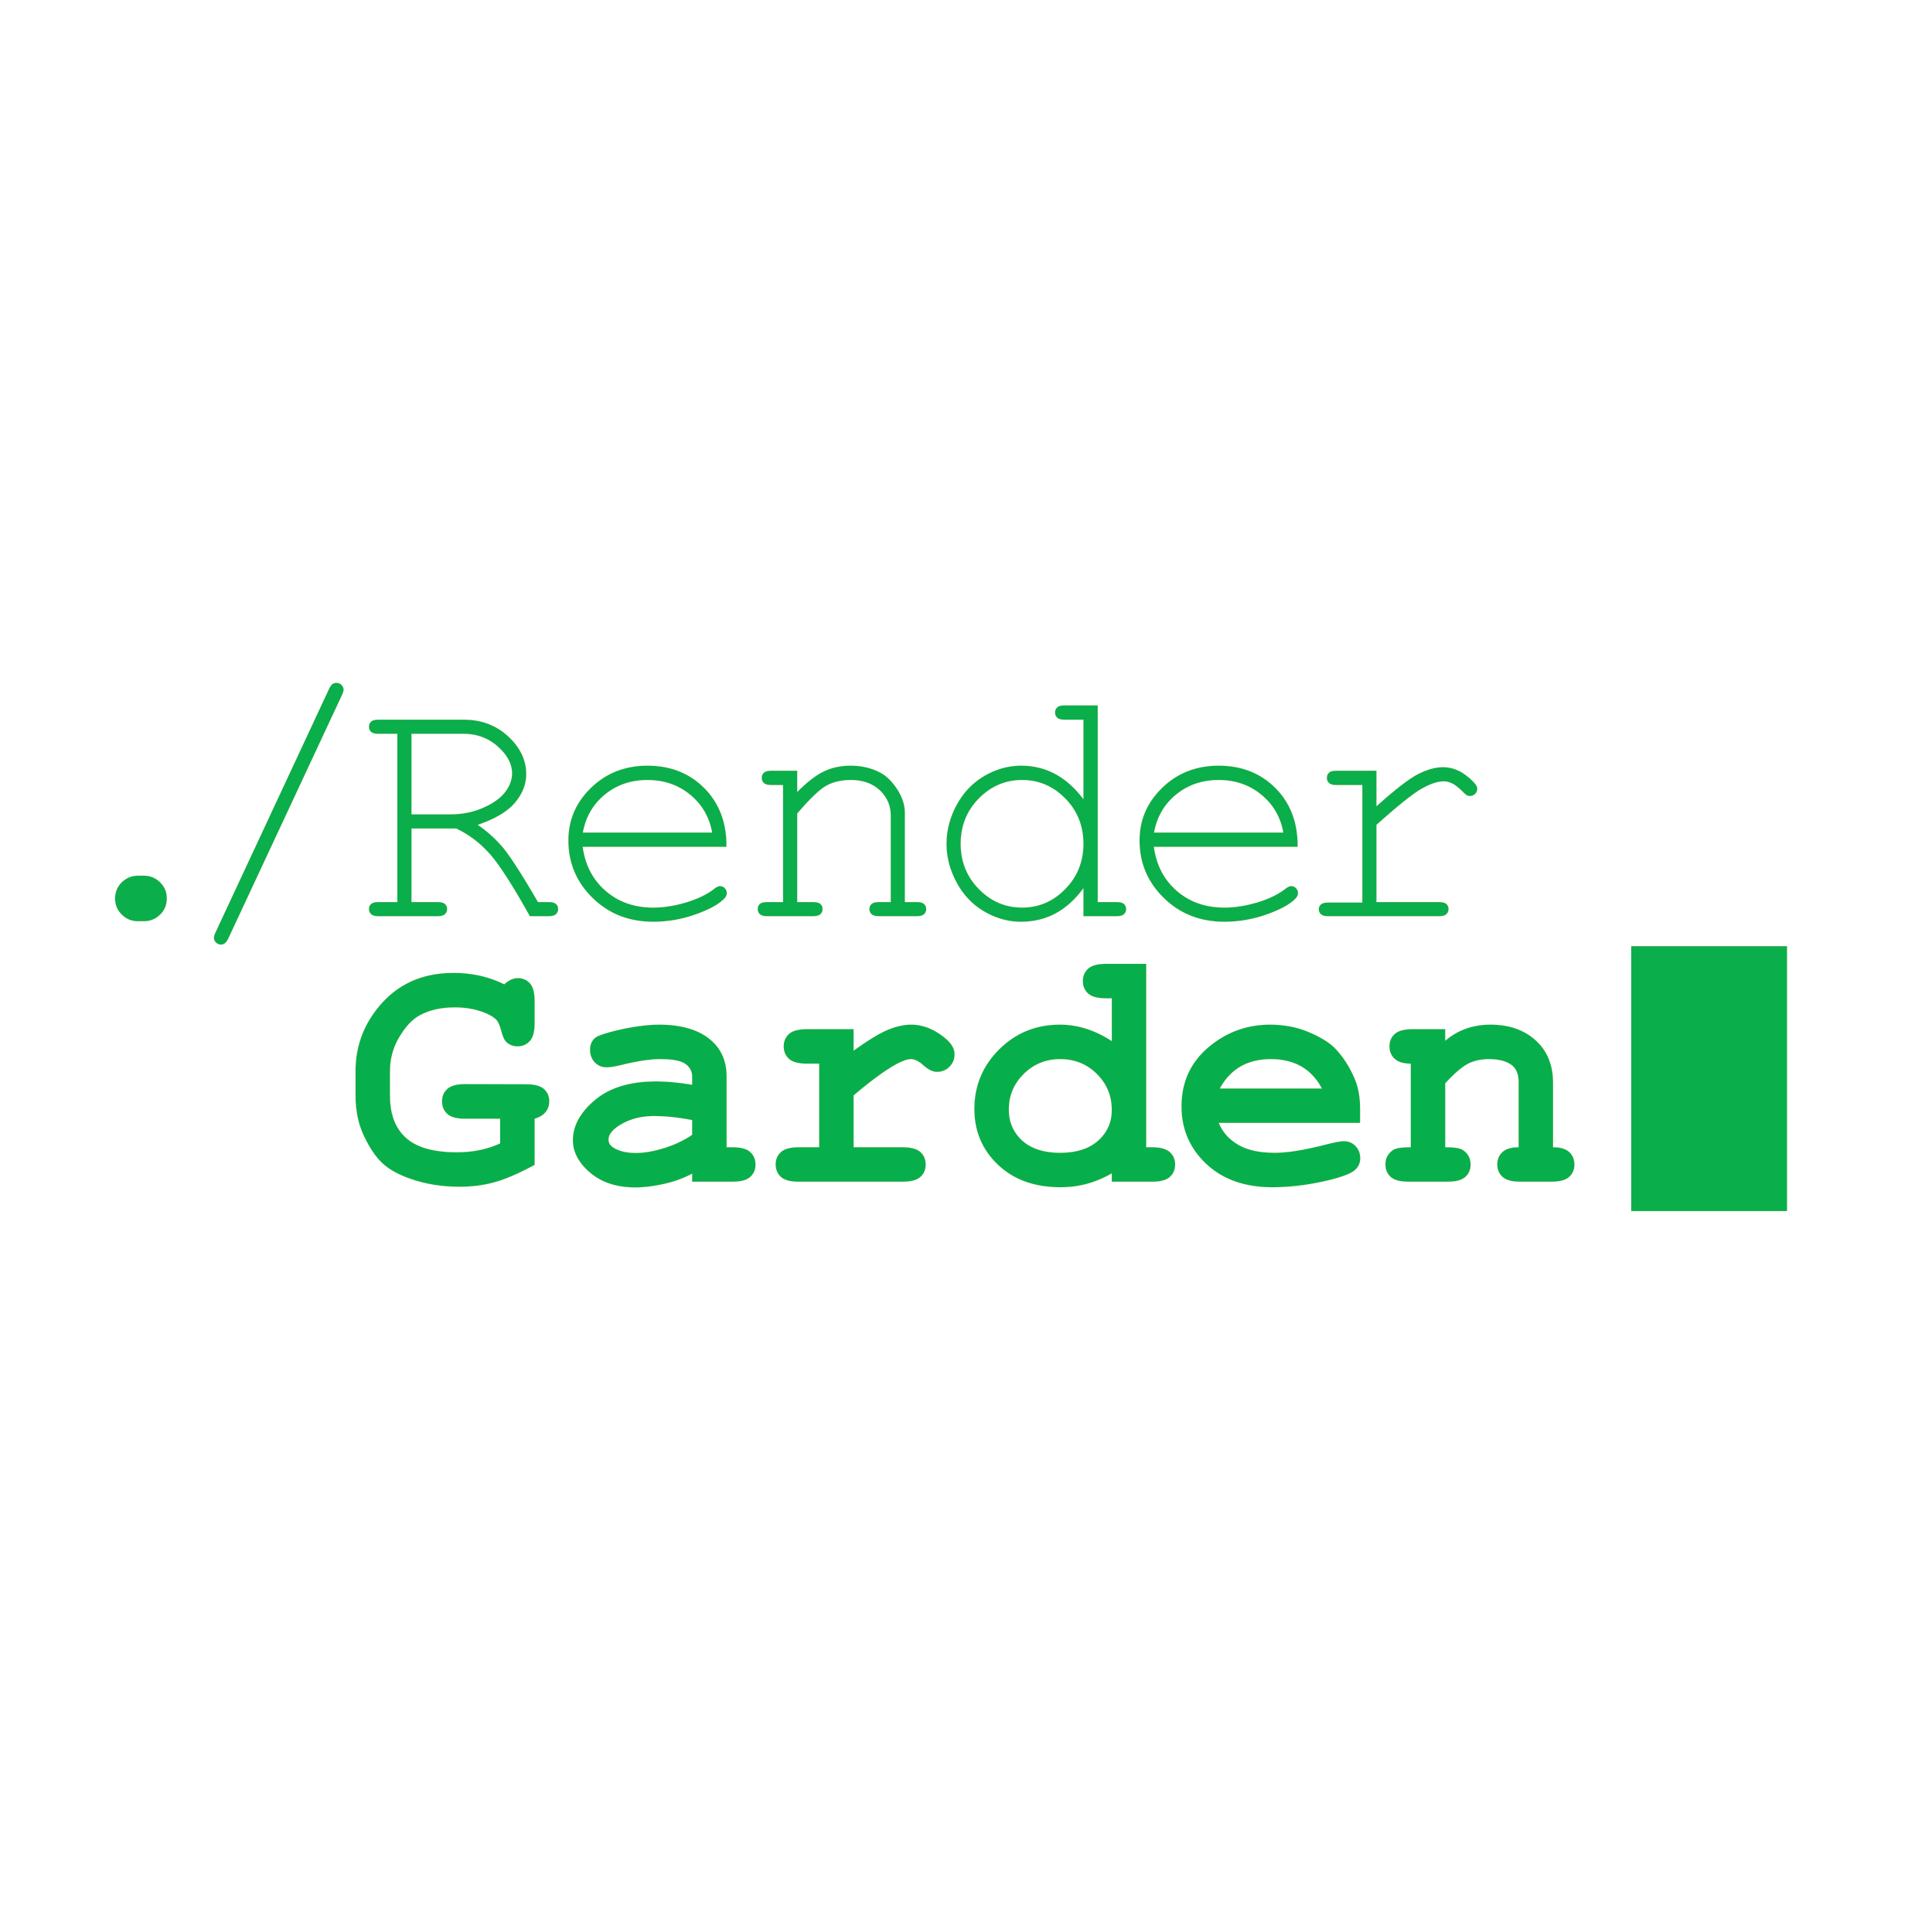 RenderGarden features unlimited render nodes for leveraging the processing power of multiple systems across a single network.